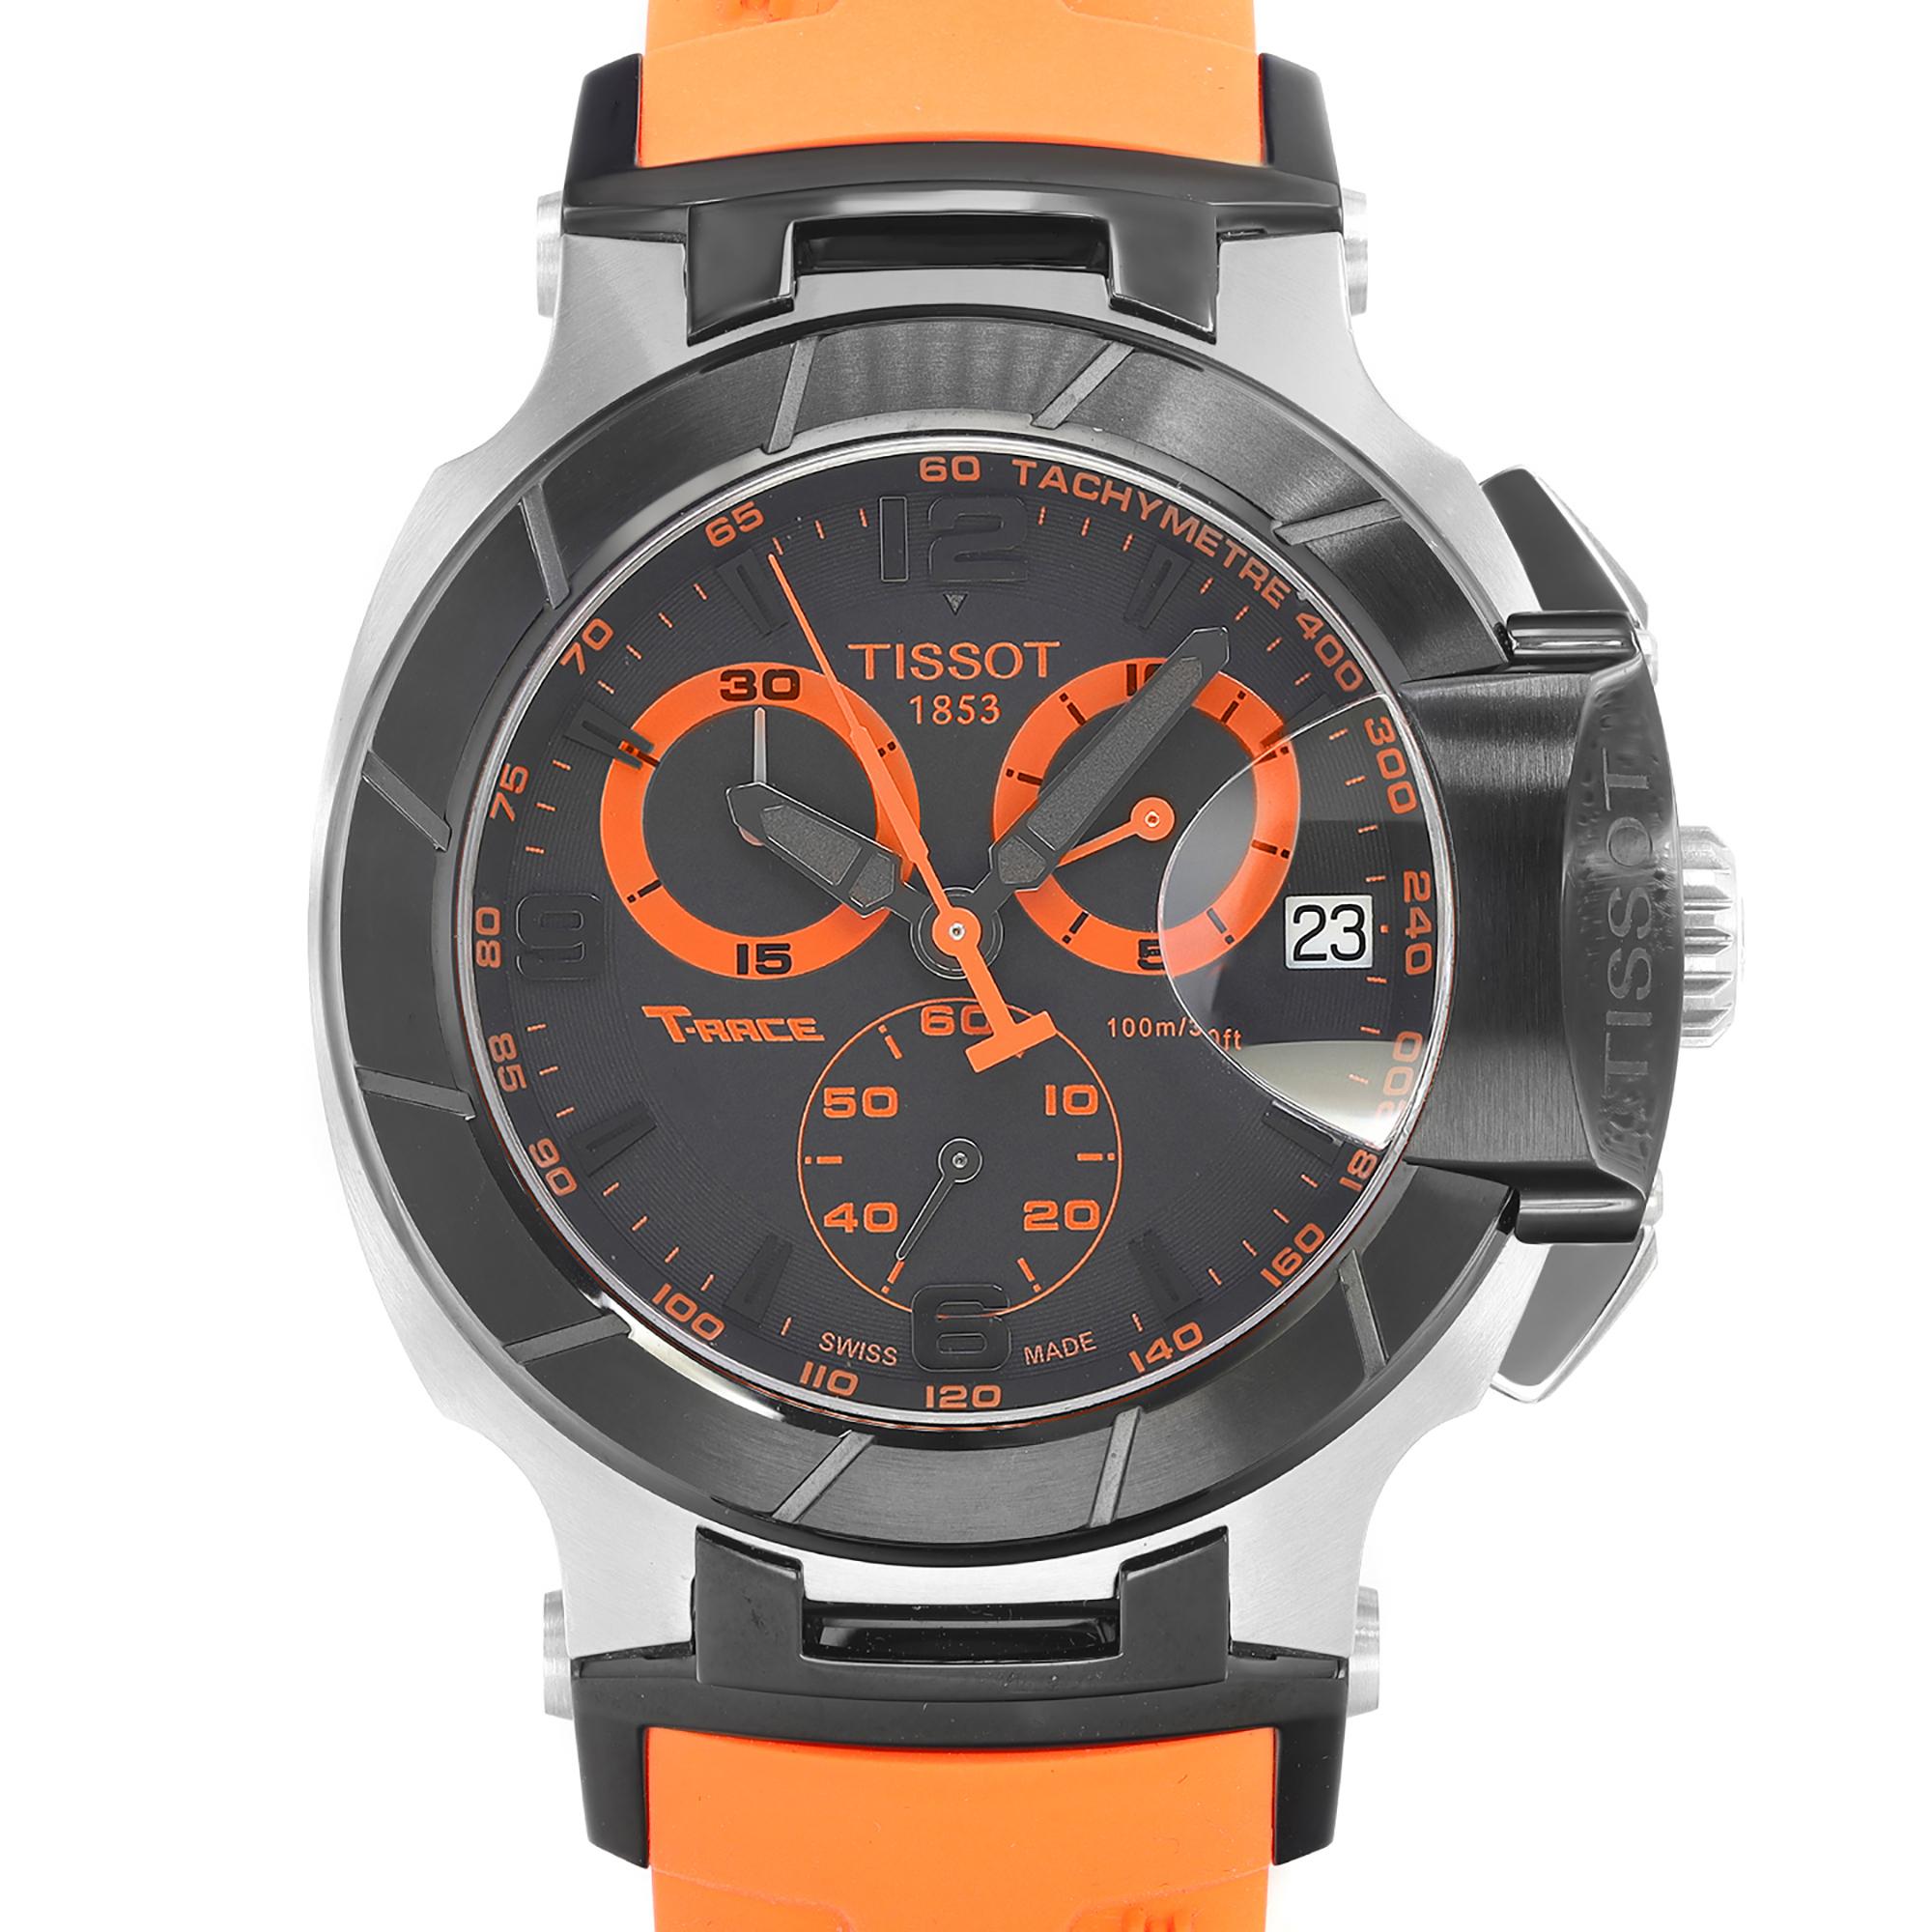 Unworn Tissot T-Race Men's Watch T048.417.27.057.04. Quartz (Battery) Movement powers this Beautiful Timepiece. Features: Round Stainless Steel Case with a Orange Rubber Strap , Fixed Black PVD Stainless Steel Bezel, Black Dial with Luminous Hands